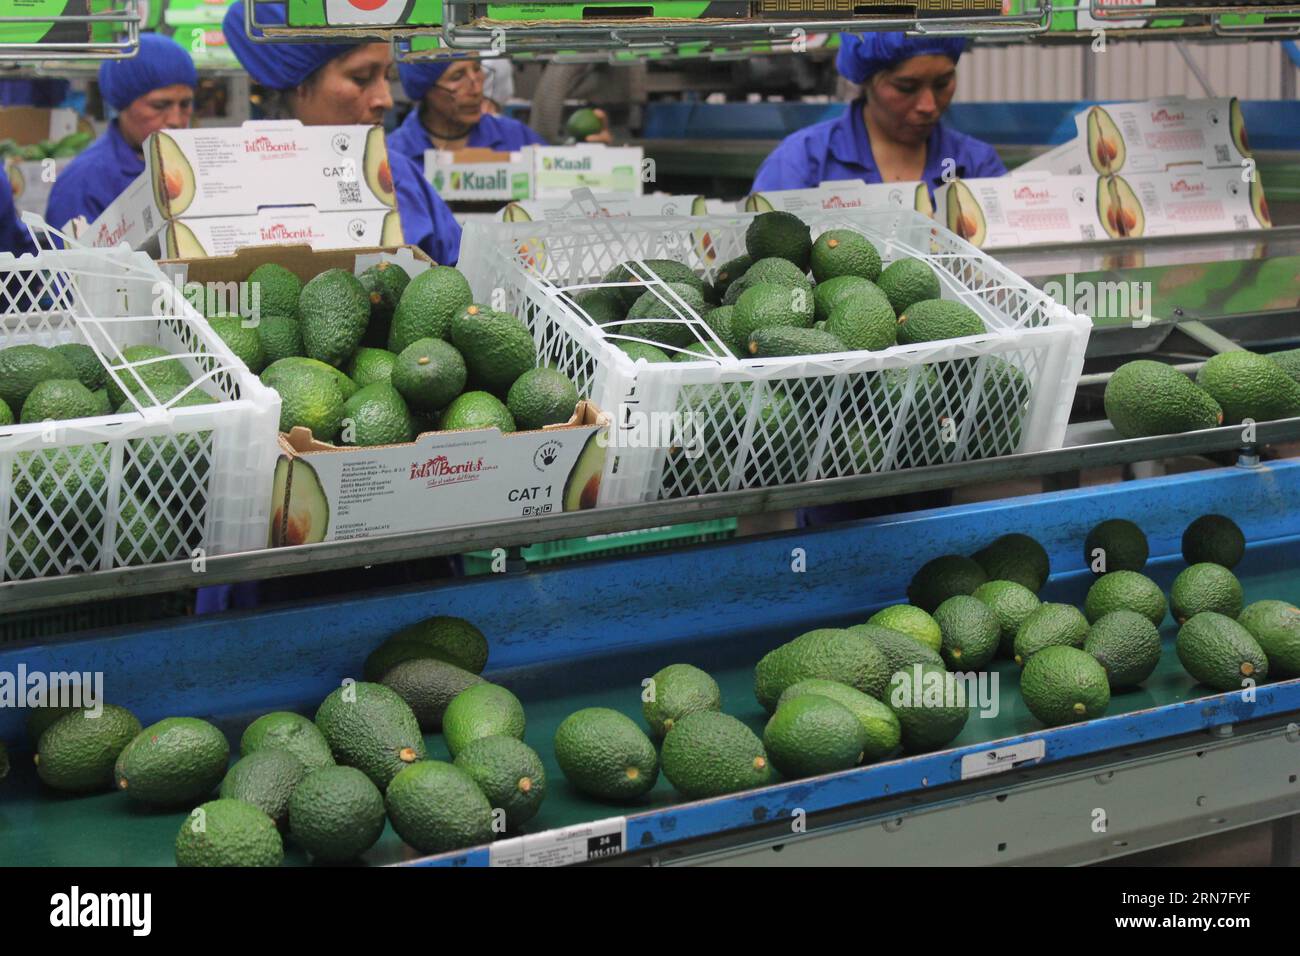 (150905) -- CHINCHA,  - Image taken on Sept. 3, 2015 shows employees selecting Hass avocados in El Carmen, Chincha province, Ica department, Peru. The Hass avocado, once matured, can remain on the tree for several months witout apparent deterioration, especially in cooler weather. The 8th World Avocado Congress will be held in the city of Lima, Peru, from Sept. 13 to Sept. 18. ) (vf) PERU-CHINCHA-INDUSTRY-AVOCADO-FEATURE LuisxCamacho PUBLICATIONxNOTxINxCHN   150905 Chincha Image Taken ON Sept 3 2015 Shows Employees selecting Hatred Avocados in El Carmen Chincha Province ICA Department Peru The Stock Photo